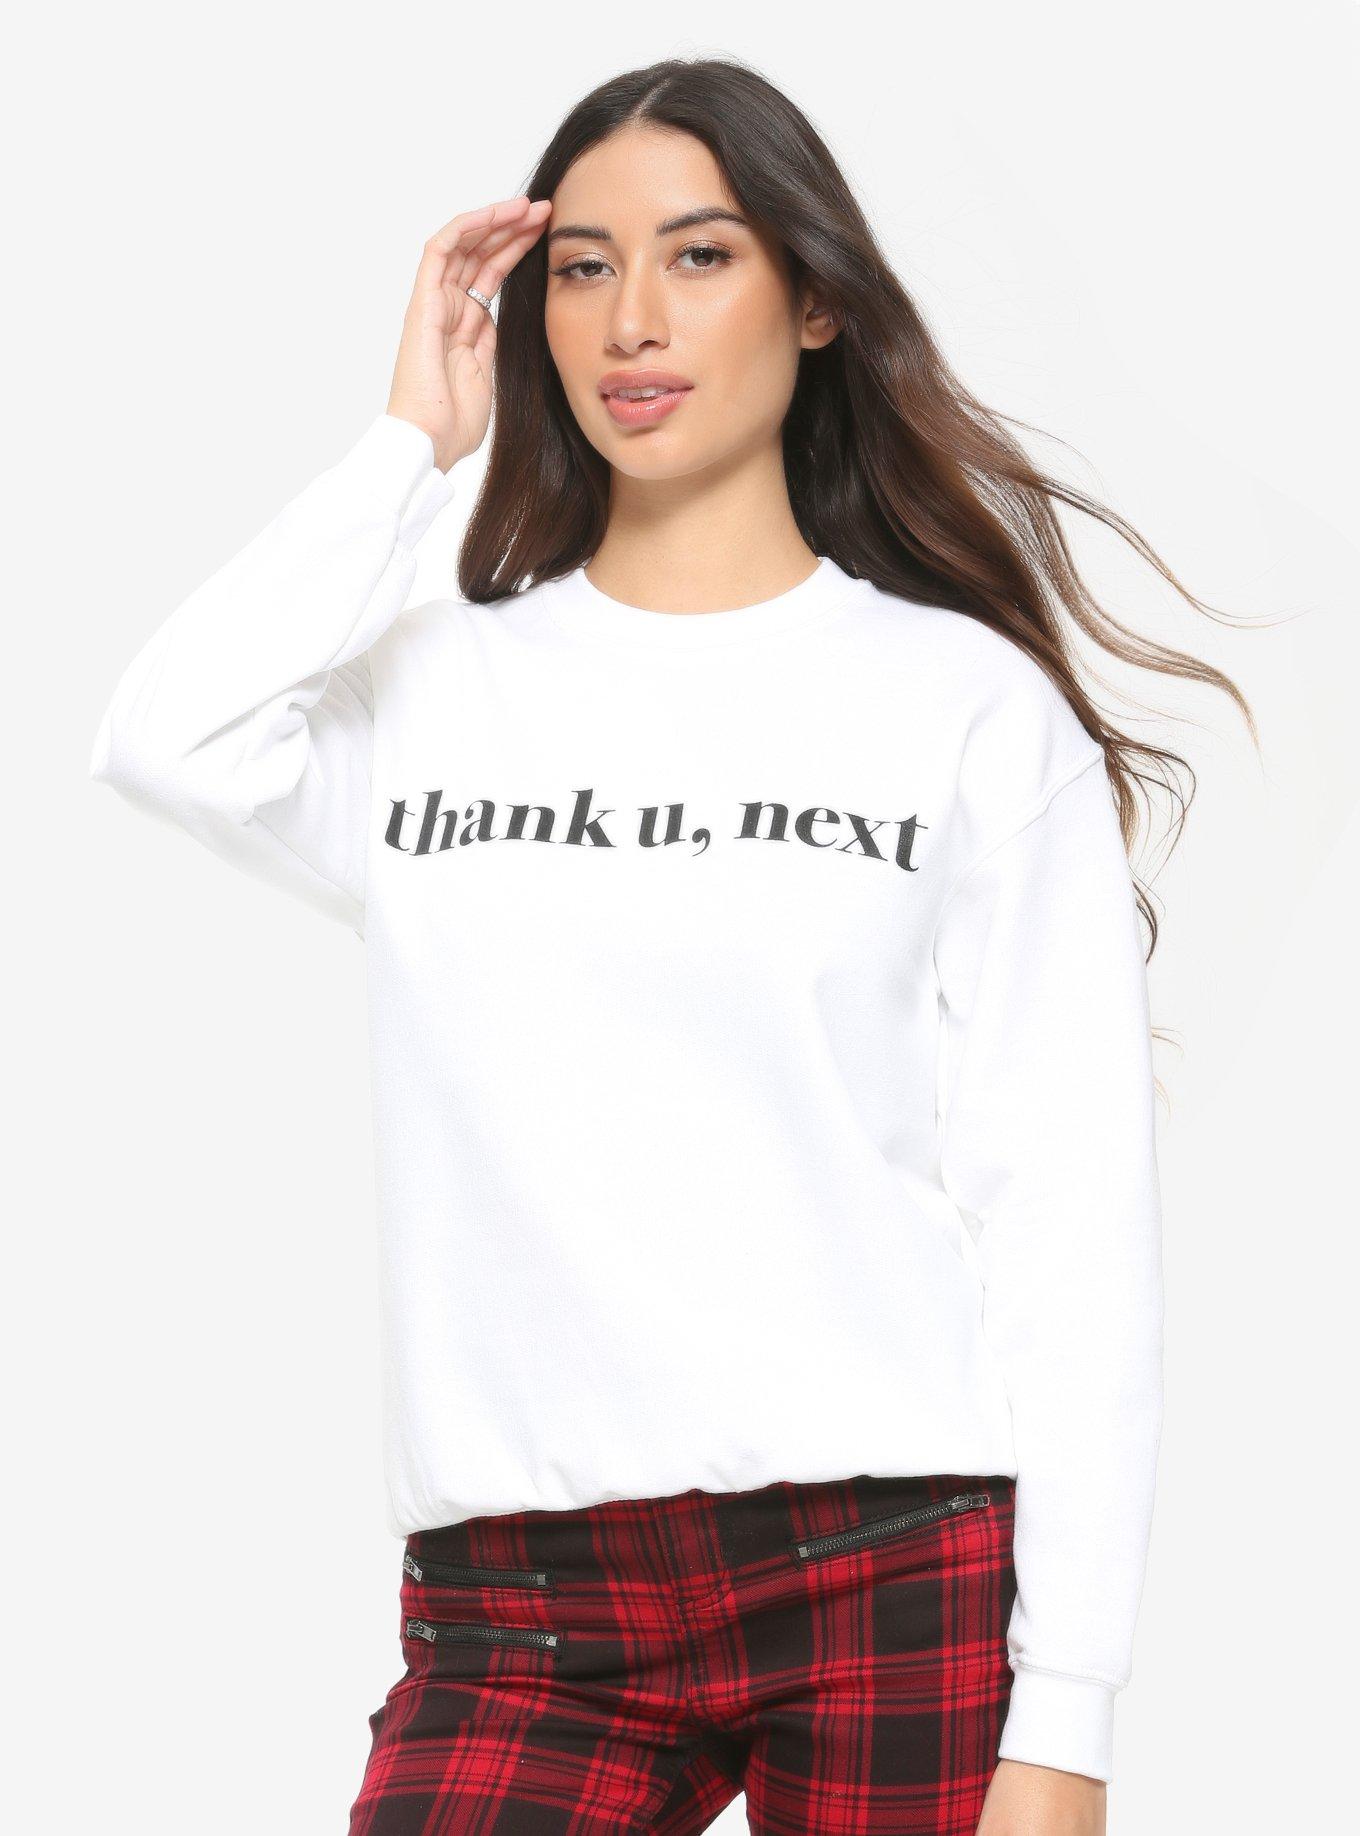 This merch from Ariana Grande is so cute I can't😍😍😍😍